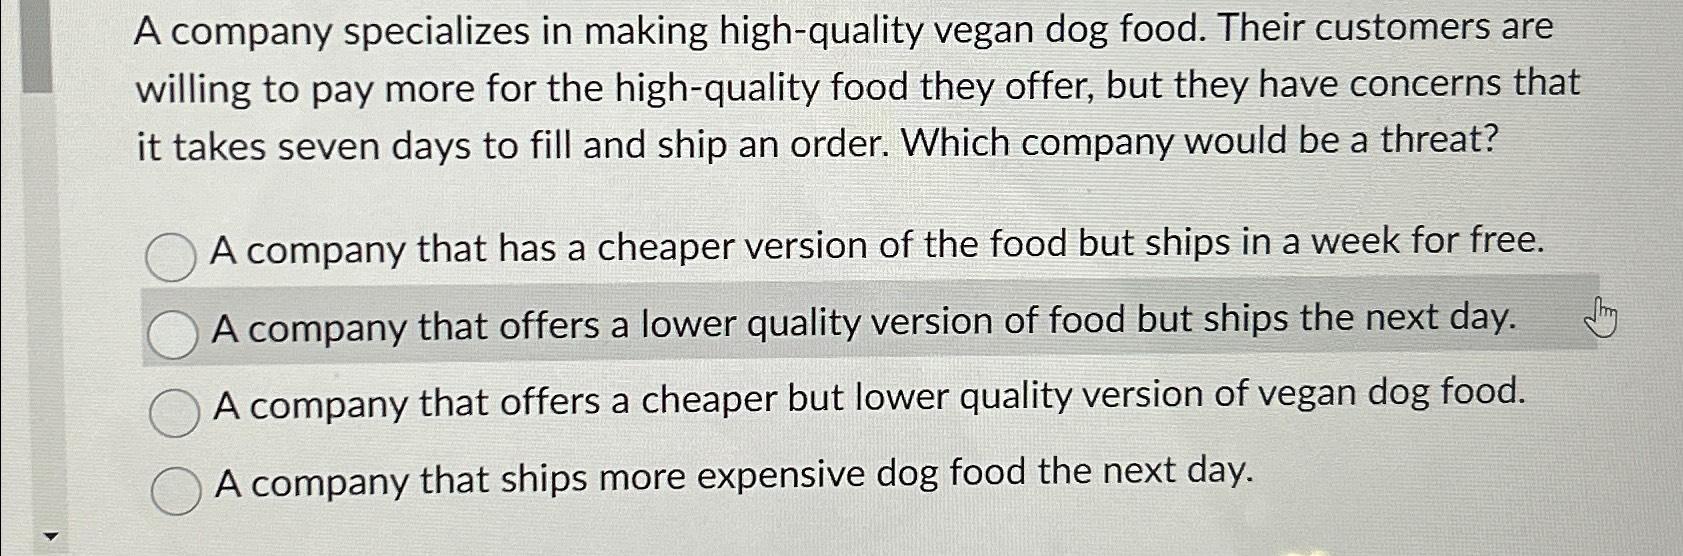 A company specializes in making high-quality vegan dog food. Their customers are willing to pay more for the